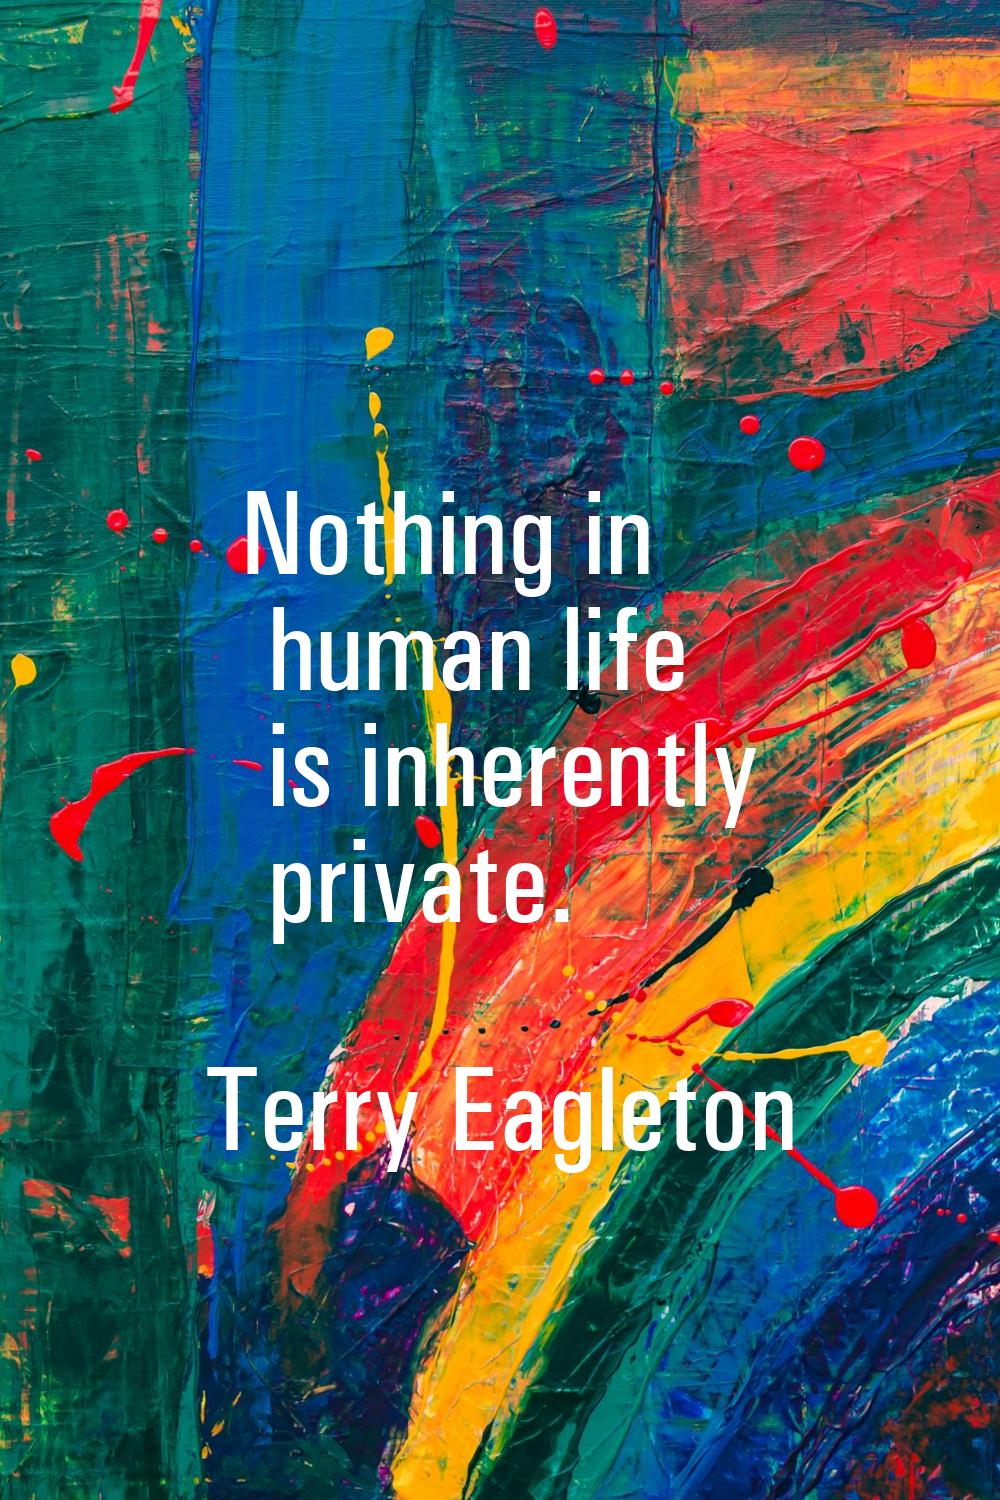 Nothing in human life is inherently private.